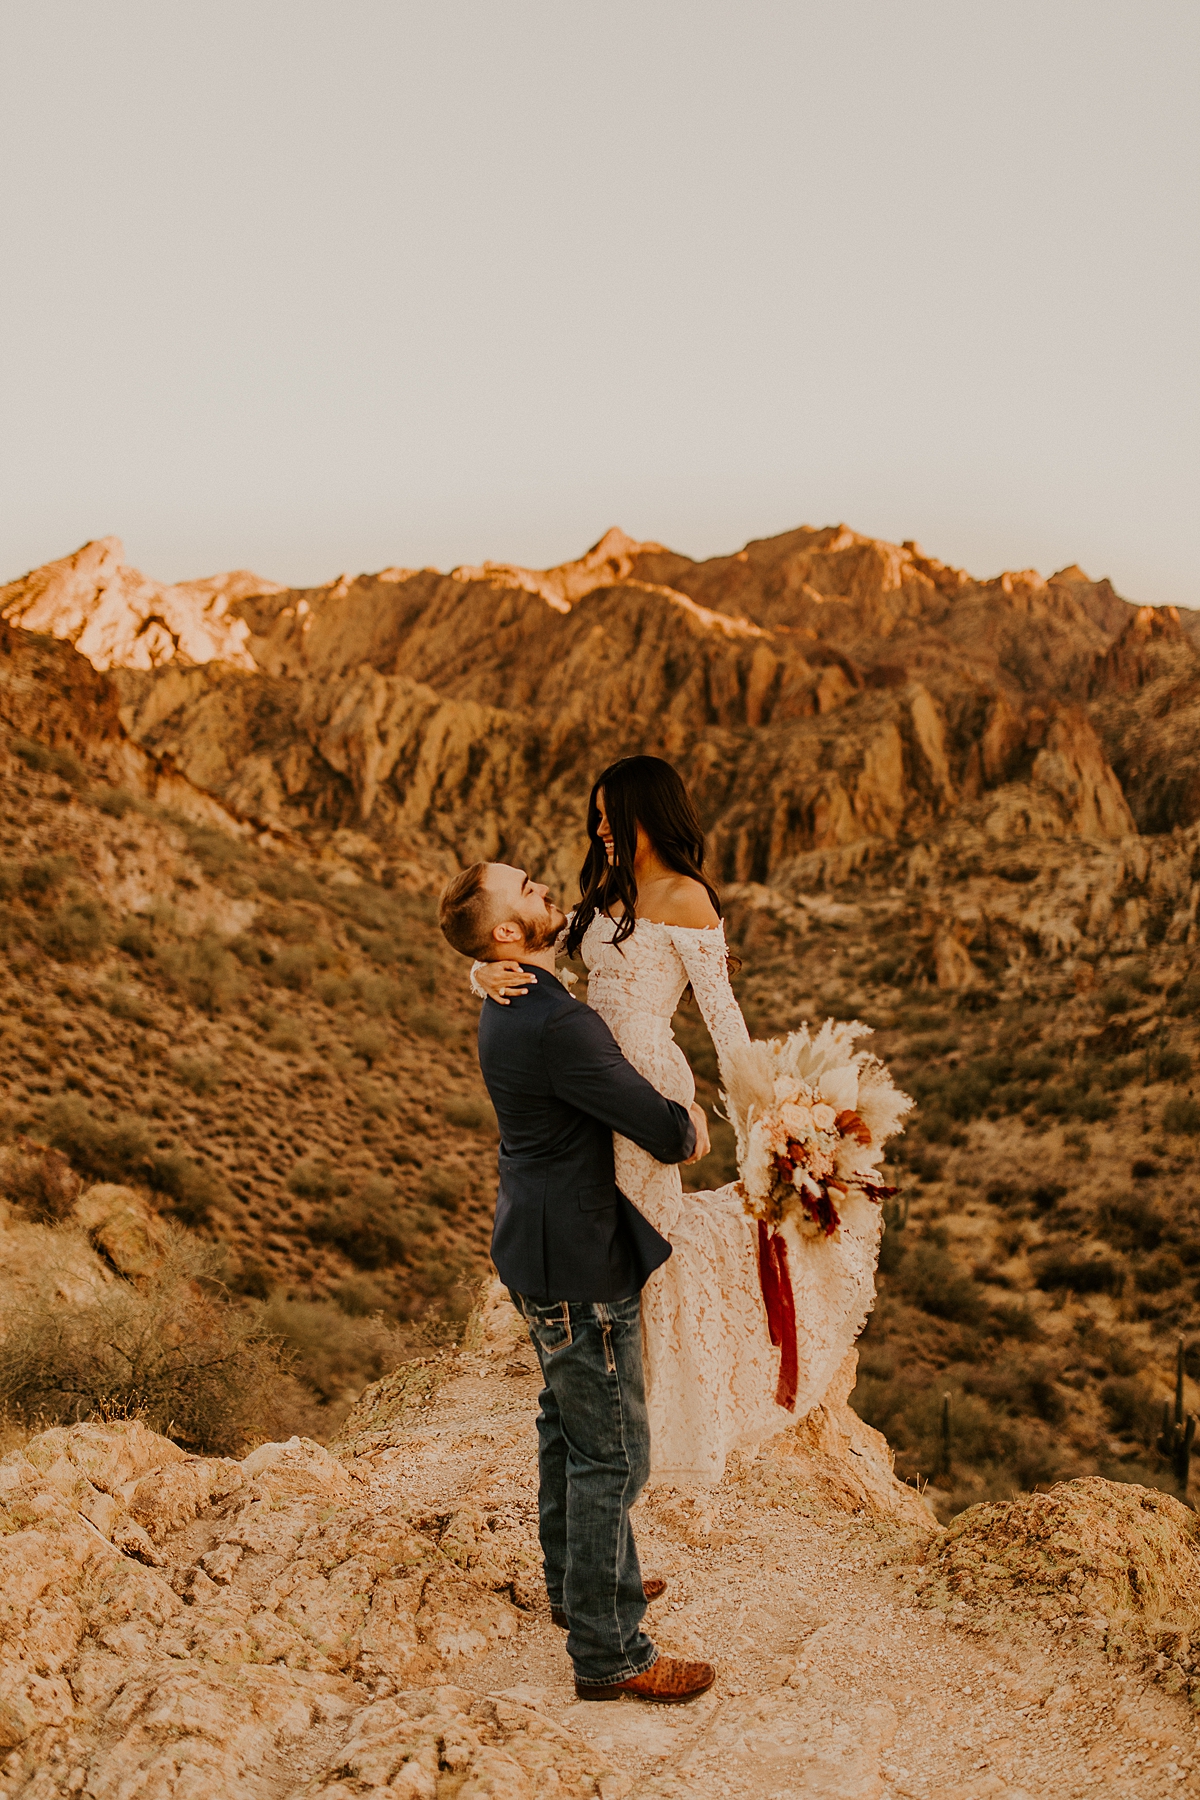 Intimate-elopement-in-superstition-mountain-wilderness-allison-slater-photography80.jpg